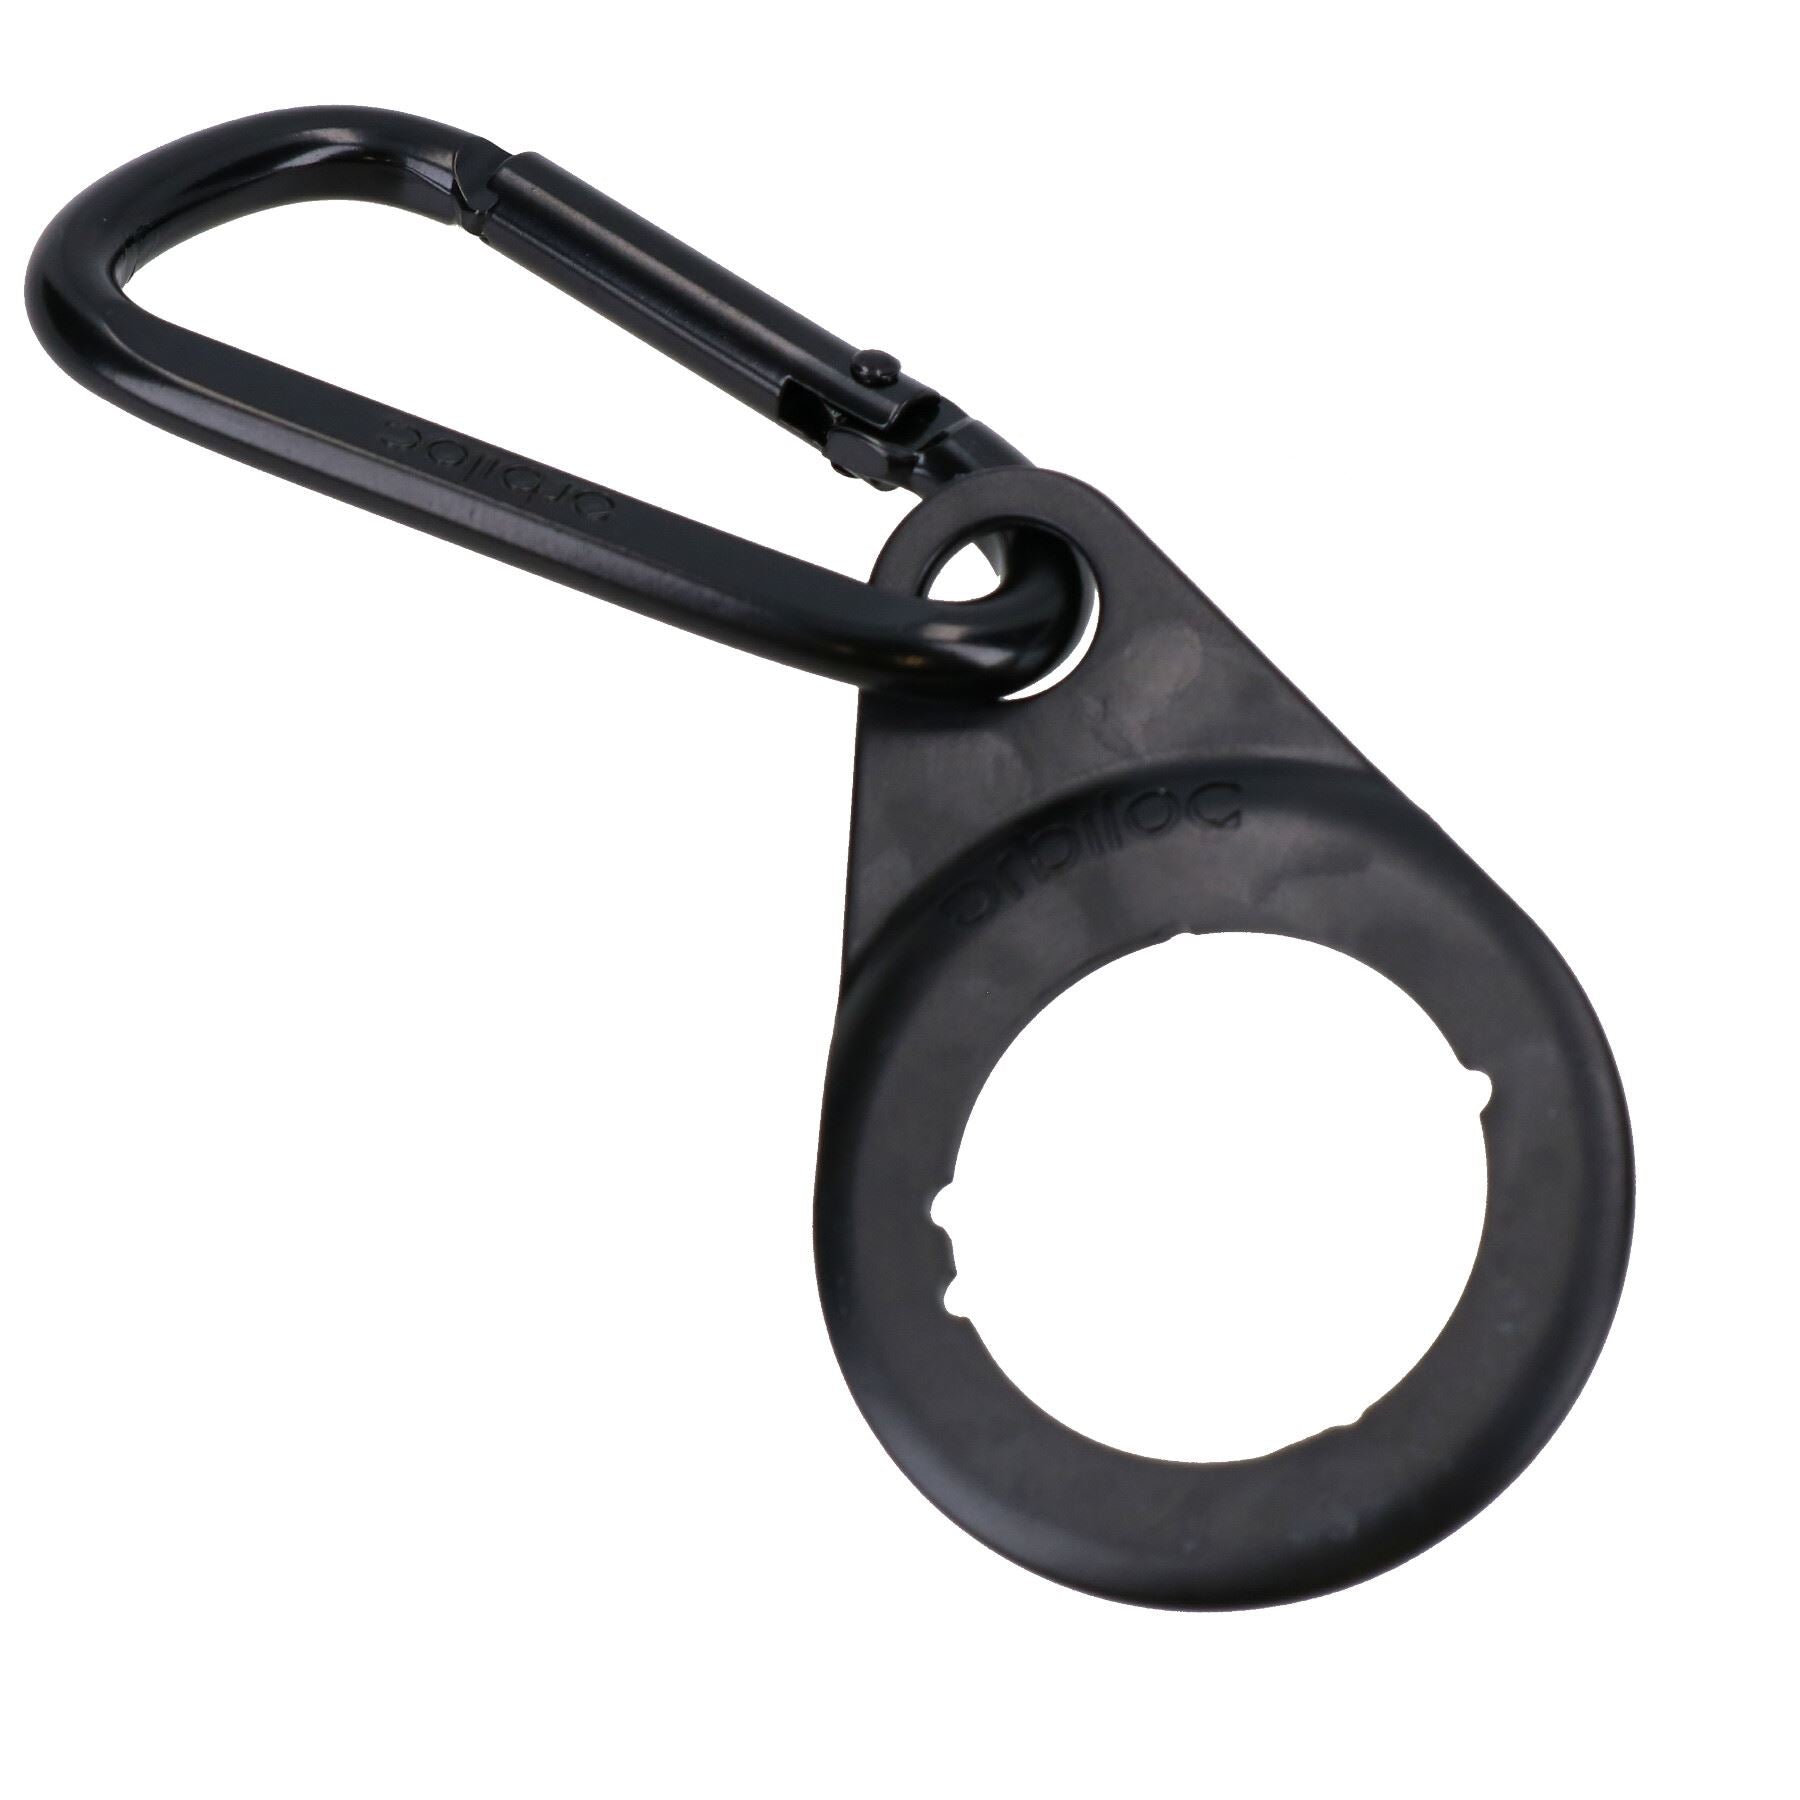 Orbiloc Carabiner for Dual Flashing/Solid Safety LED Light for Dogs